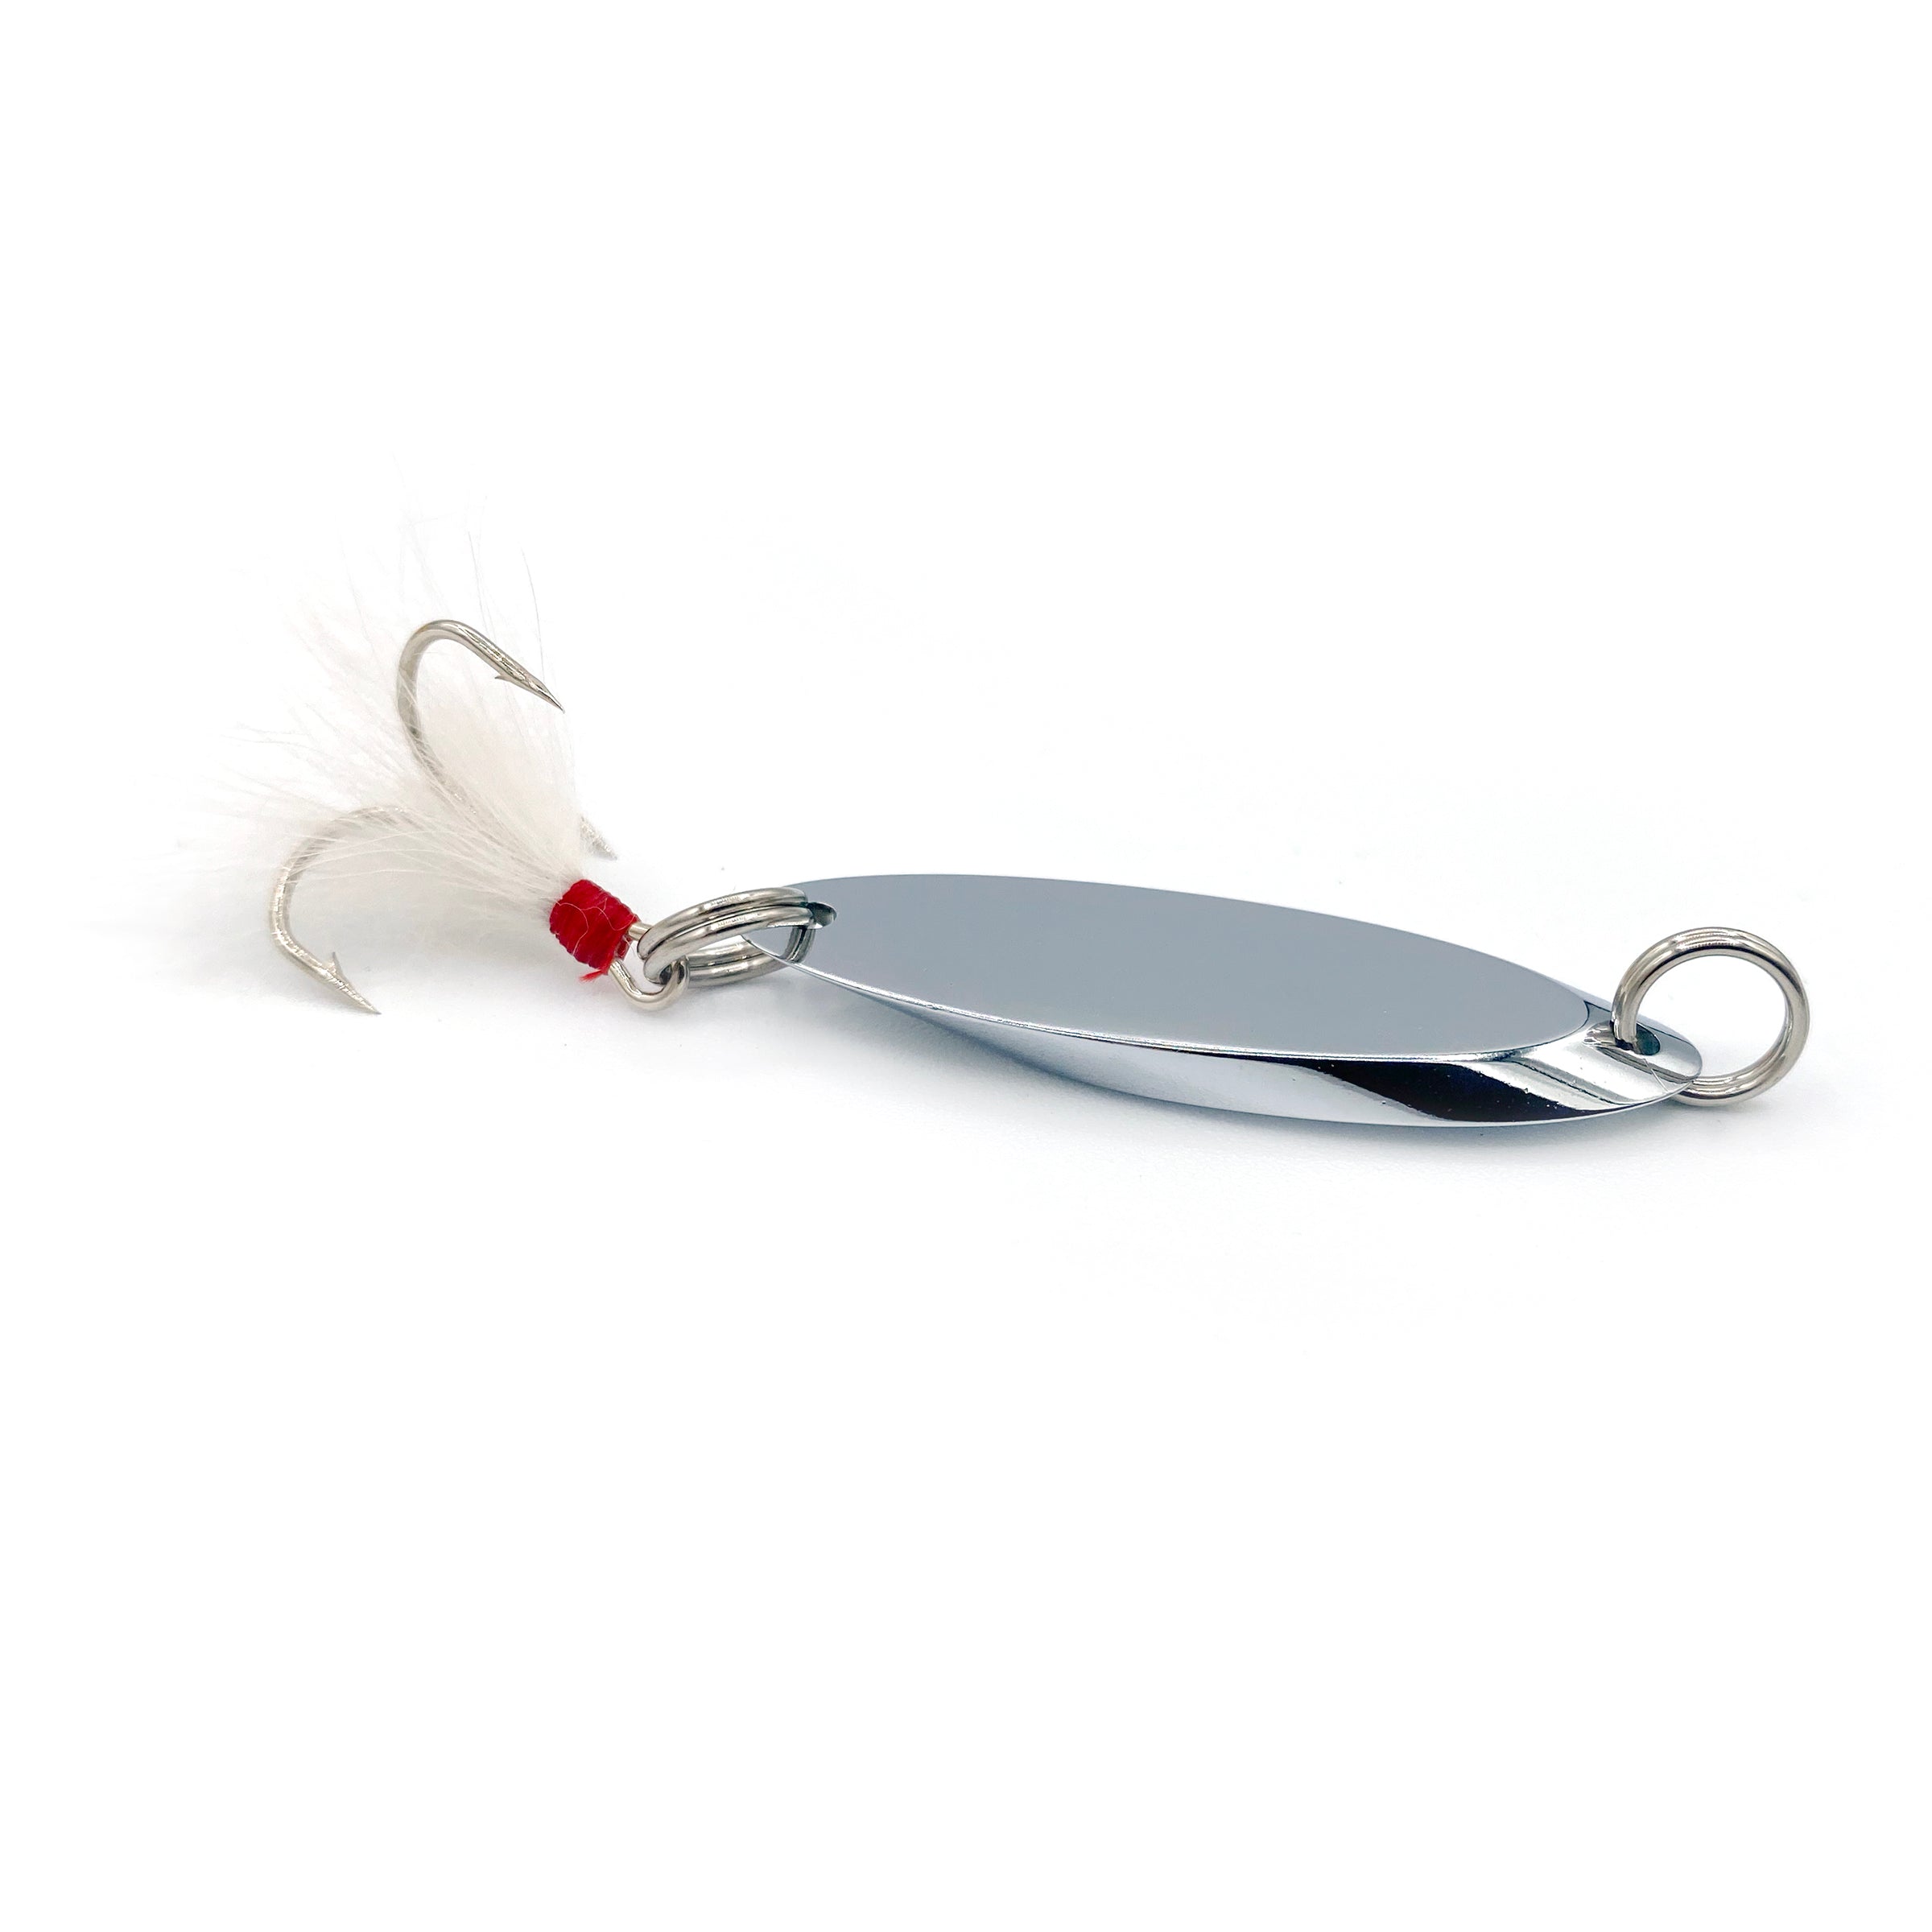 Nickel Plated Casting Spoons with Single Hook and Bucktail